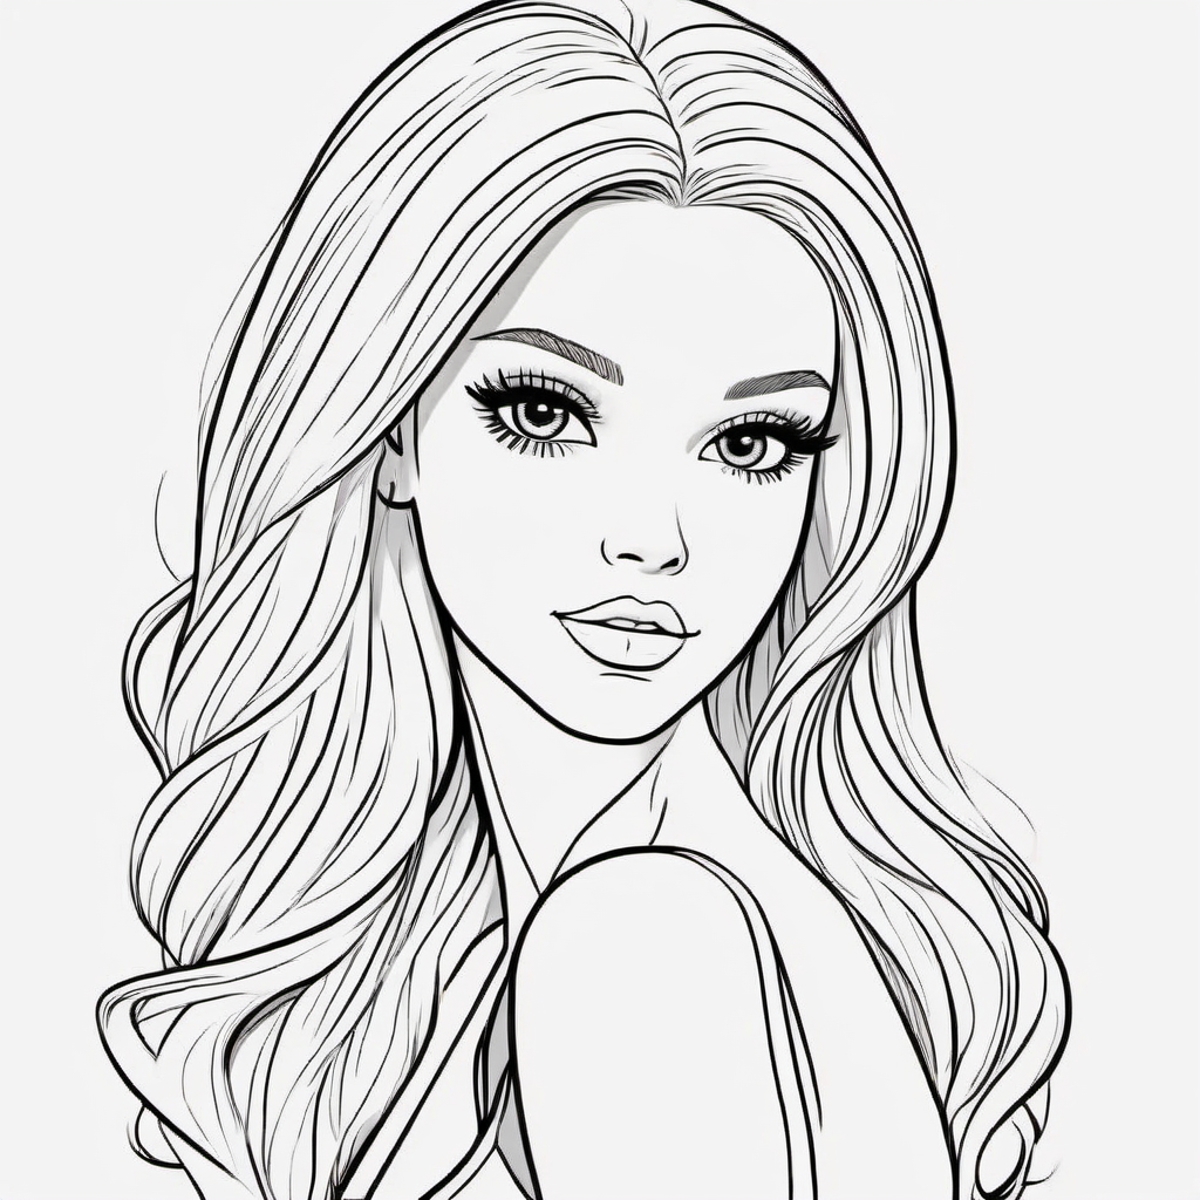 Coloring book - LineArt image by Scofano